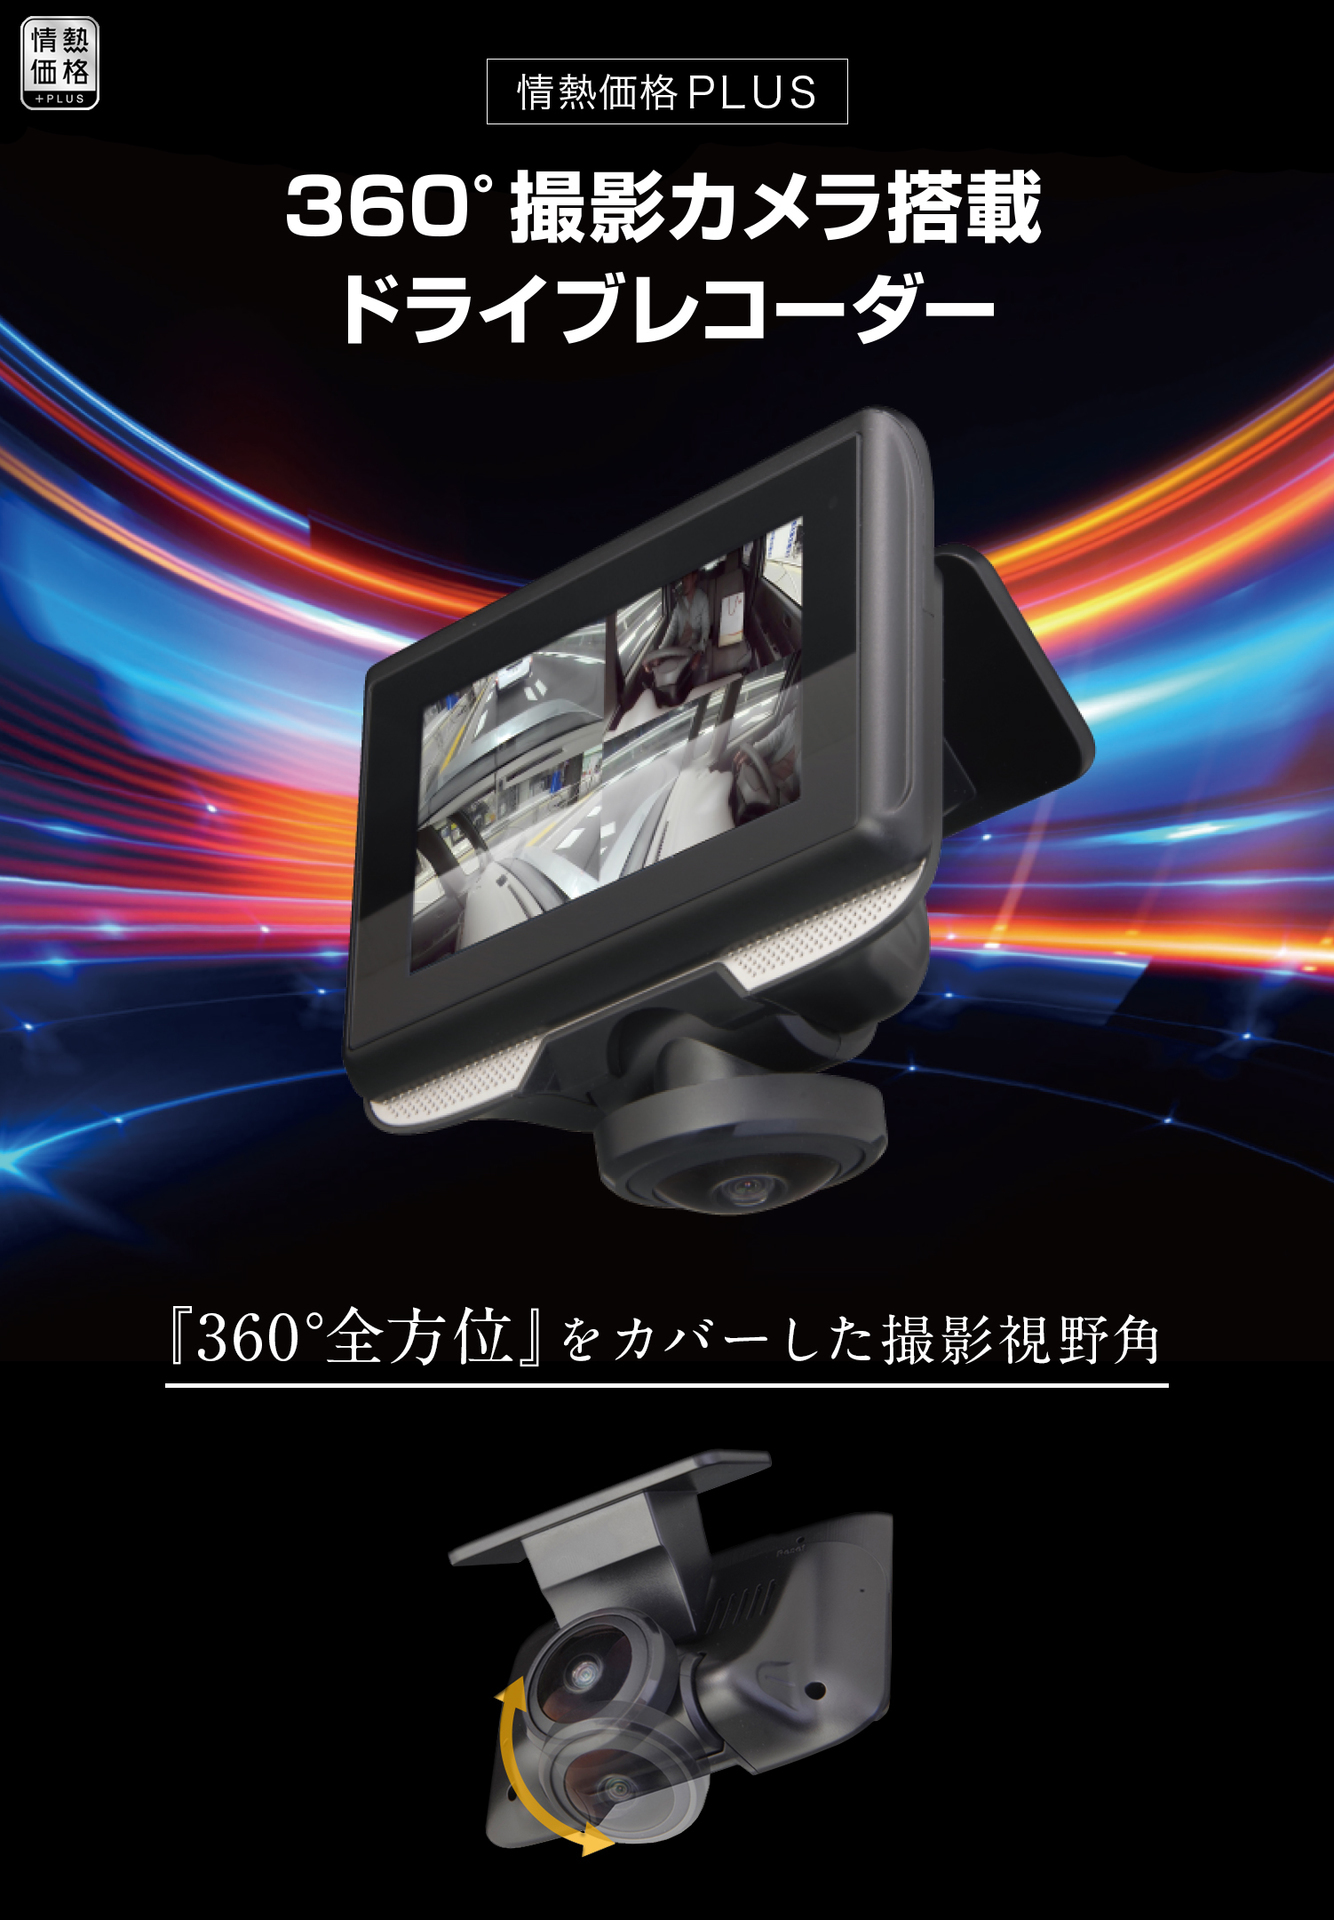 Hotly Recommended Don Quijote Donki Hote Shop Japan Drive Recorder With 360 Camera 1 1 Information Station For Don Quijote Donki Hote Shop Japan